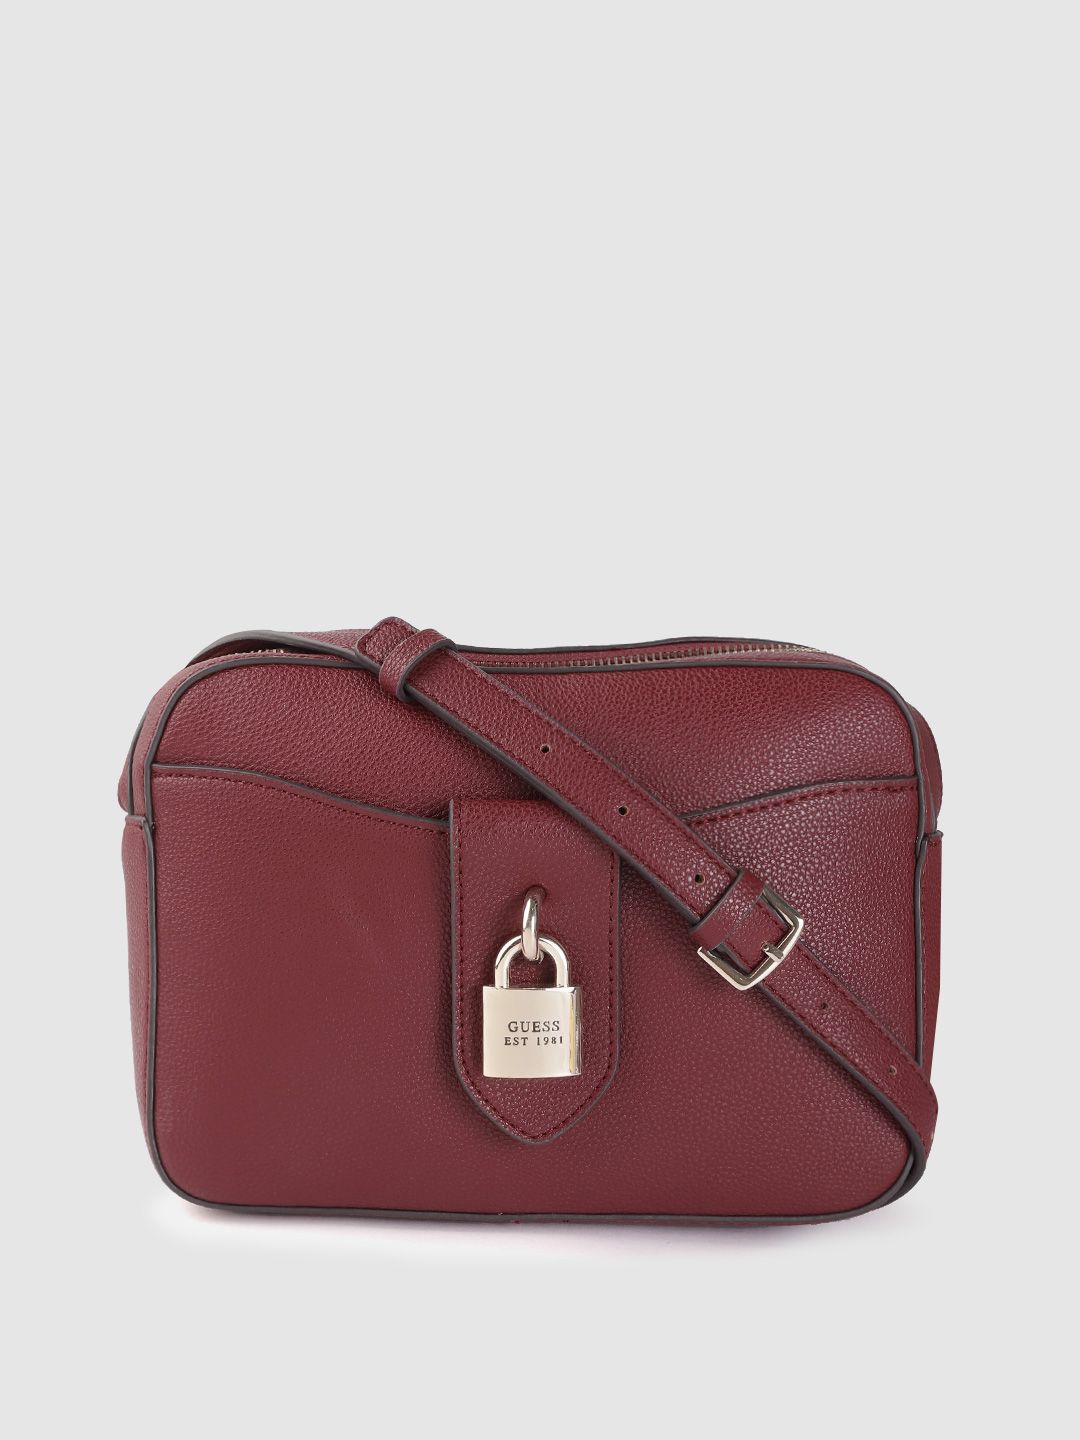 GUESS Burgundy Solid Structured Sling Bag Price in India